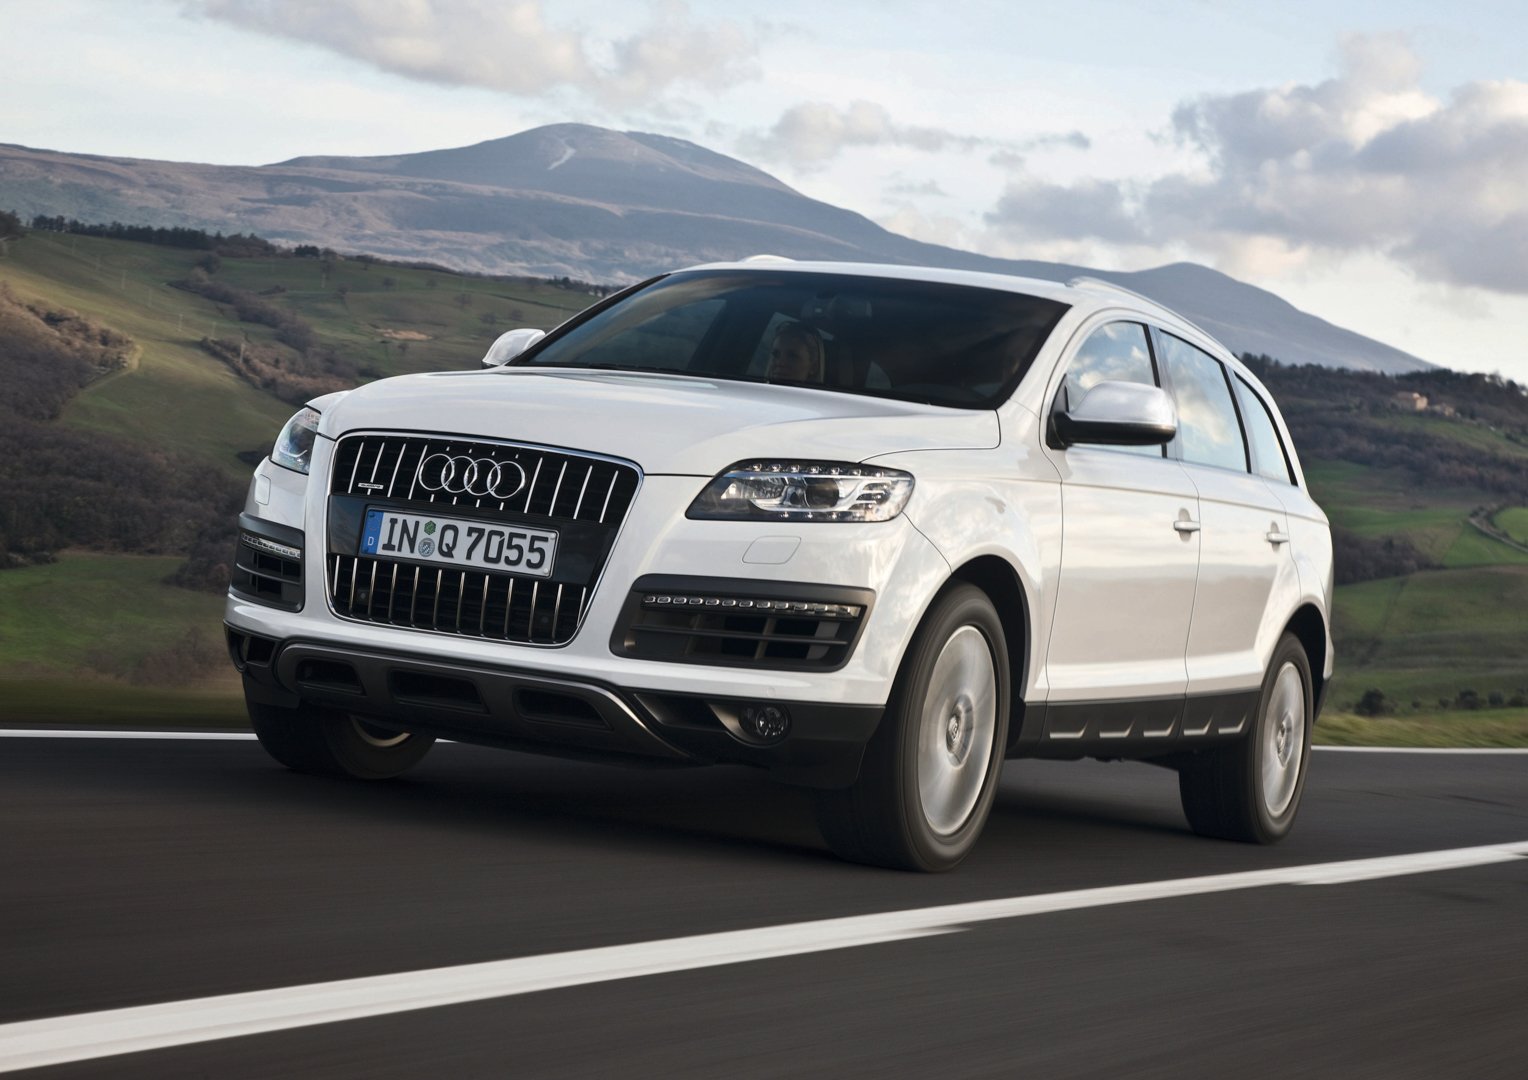 Audi Q7 Owner Gets Rs 17 Lakh Insurance Payout After 7 Years Of Legal Battle